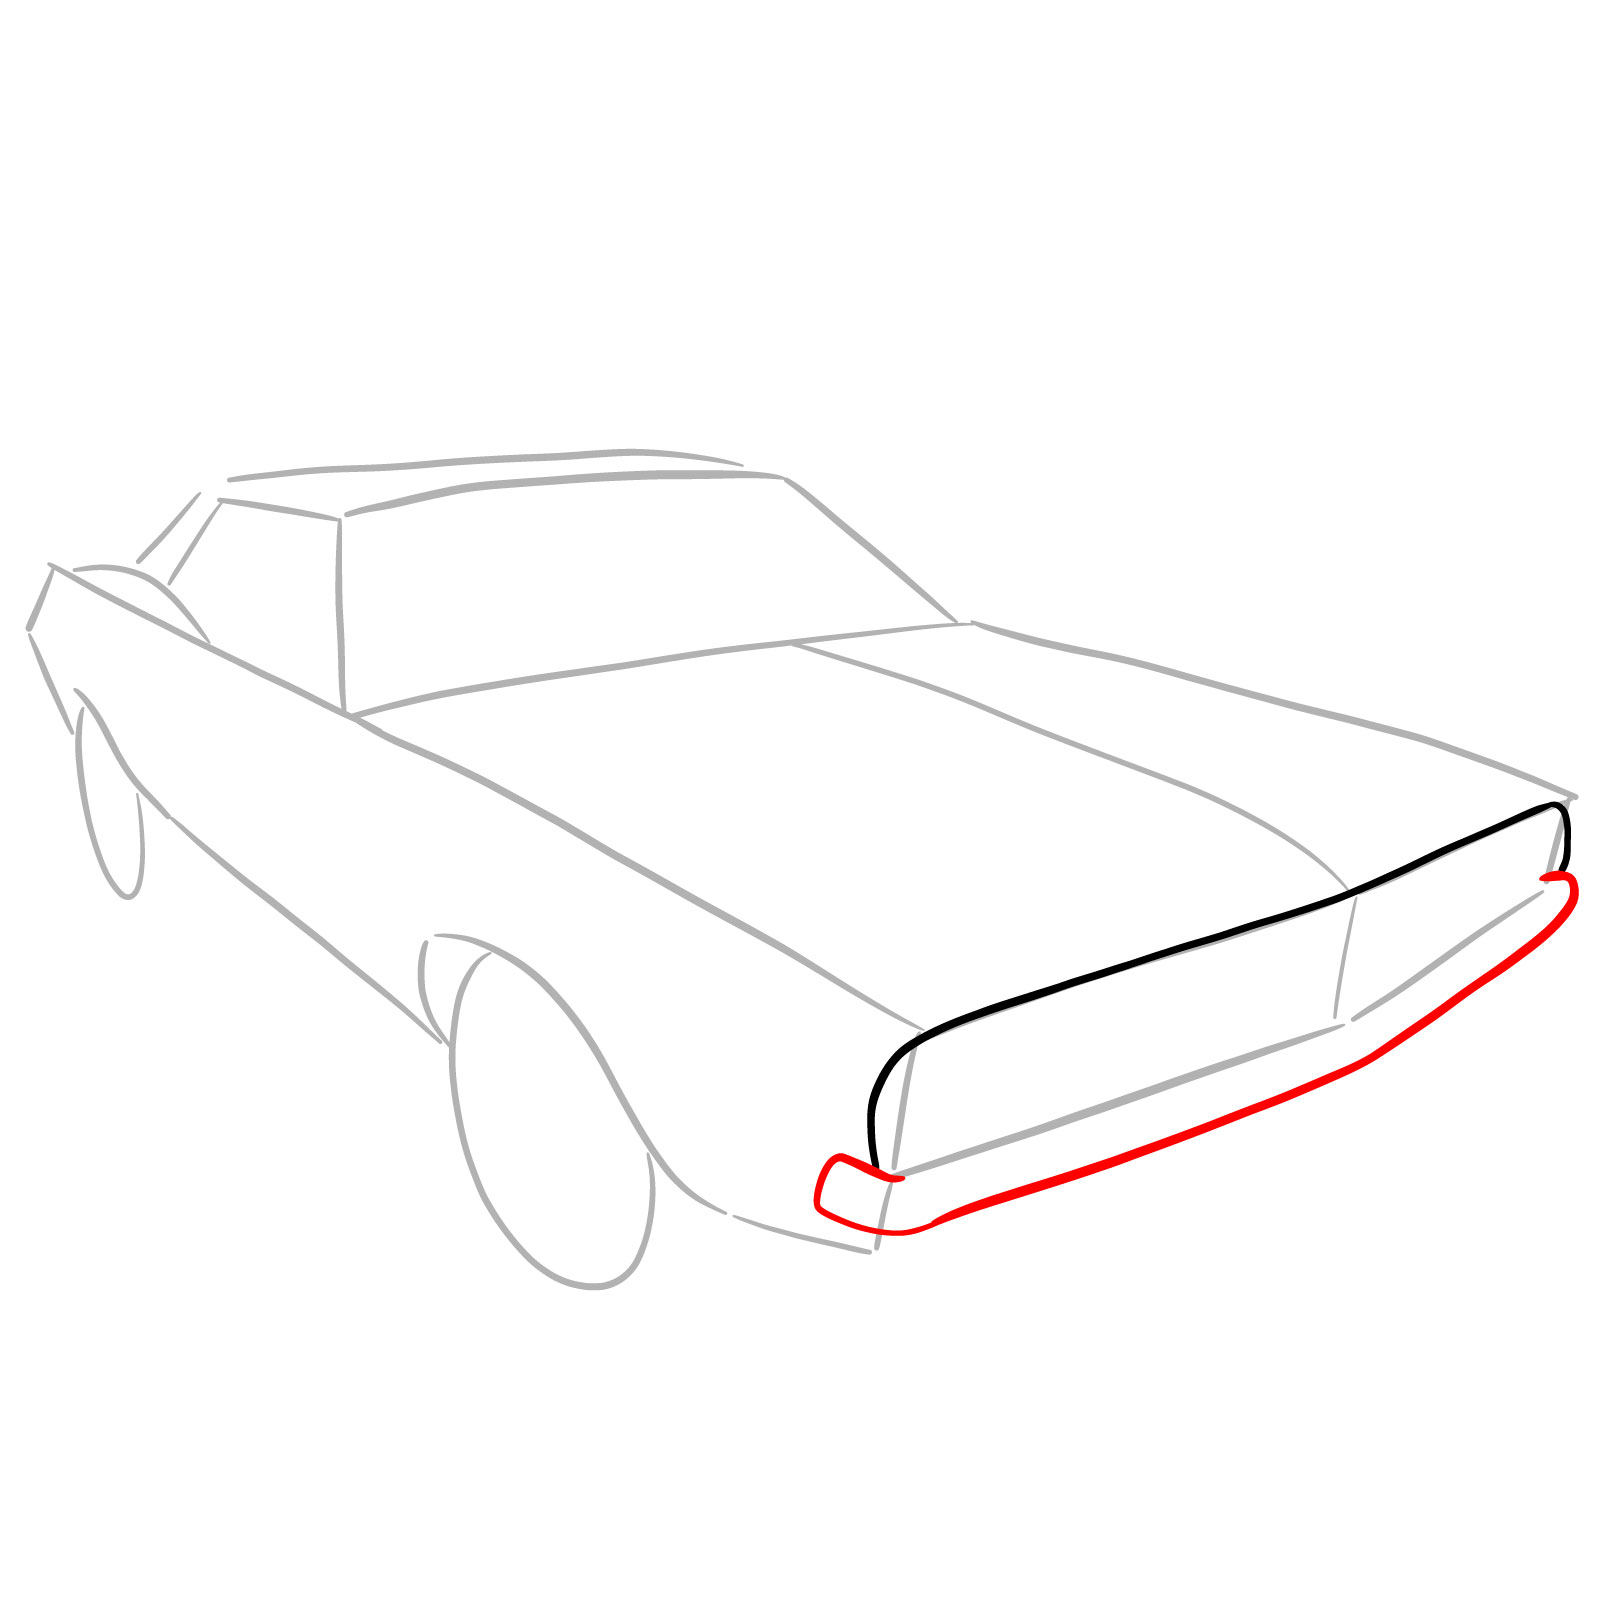 How to draw Dodge Challenger 1970 - step 05